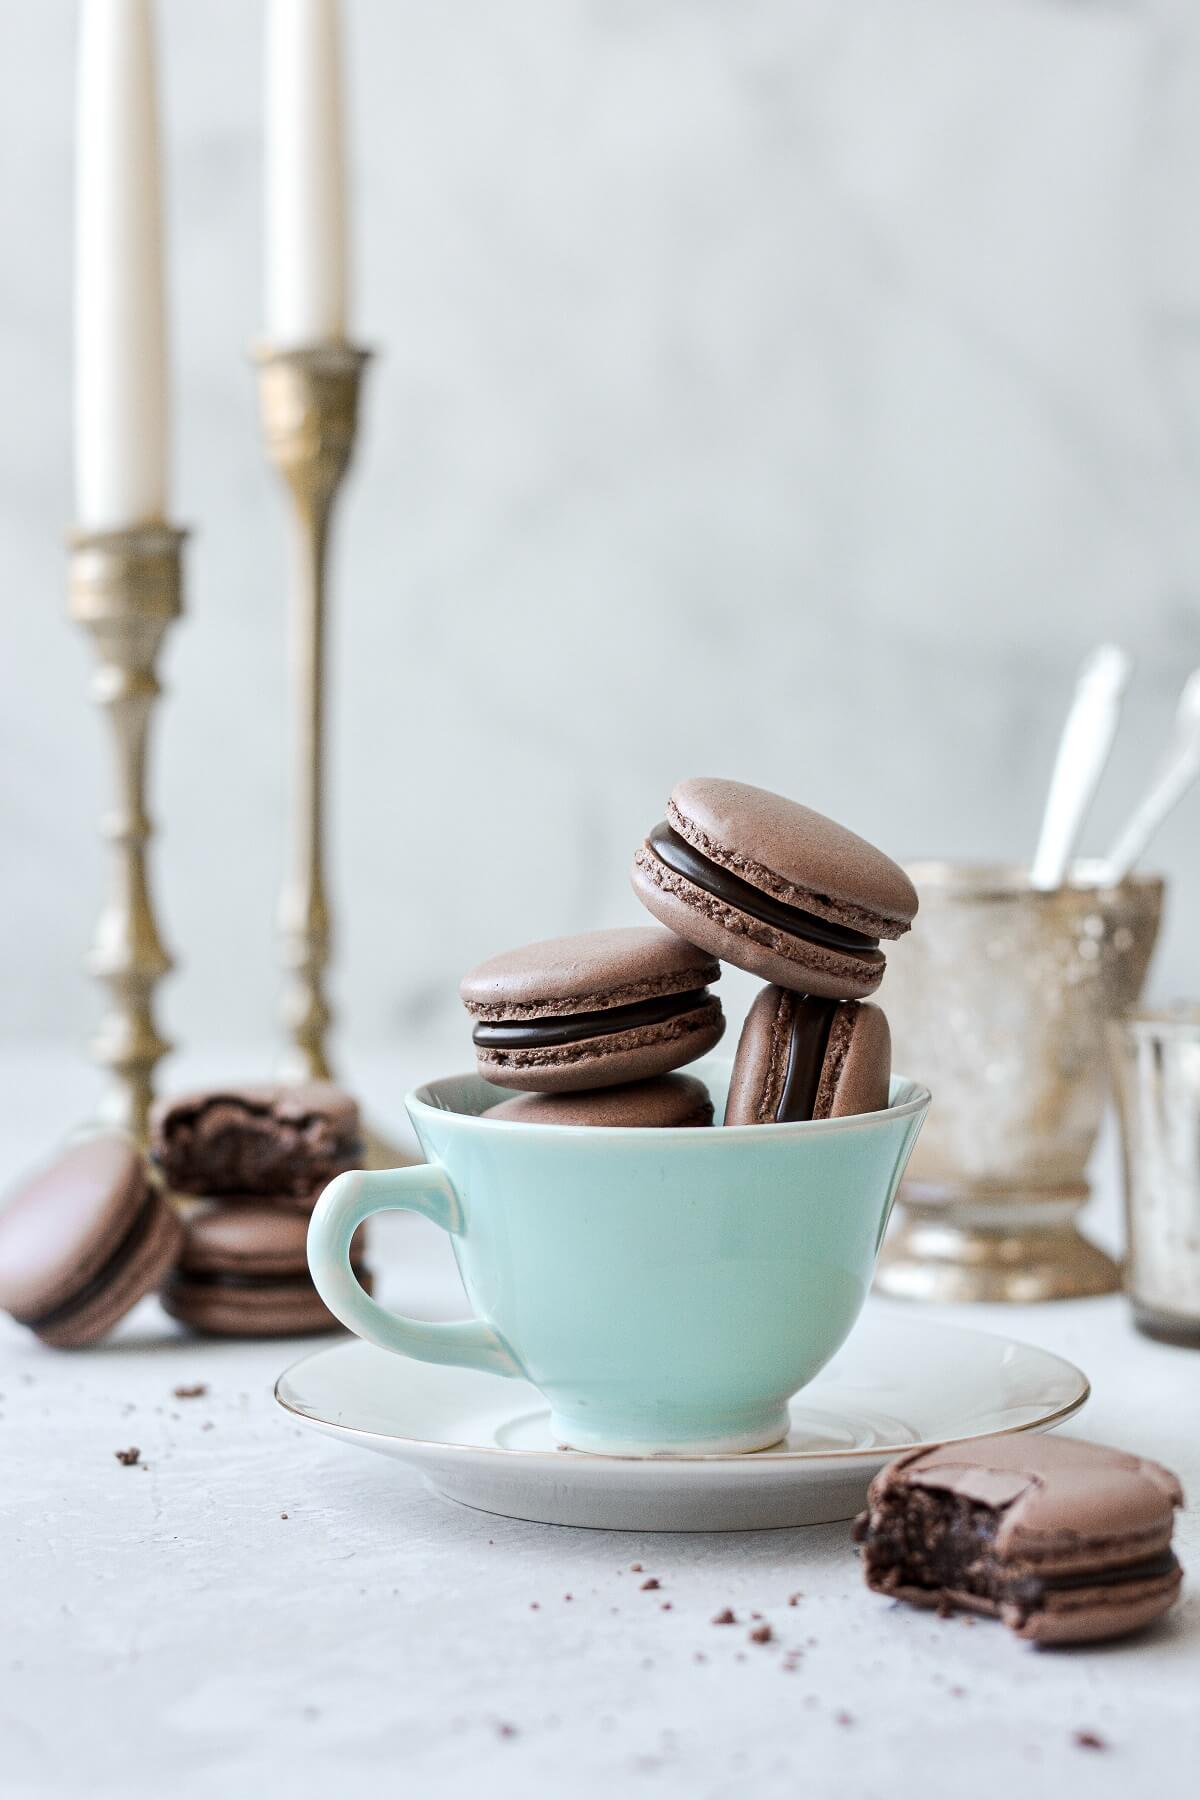 Chocolate macarons, filled with dark chocolate ganache, arranged in a vintage tea cup.